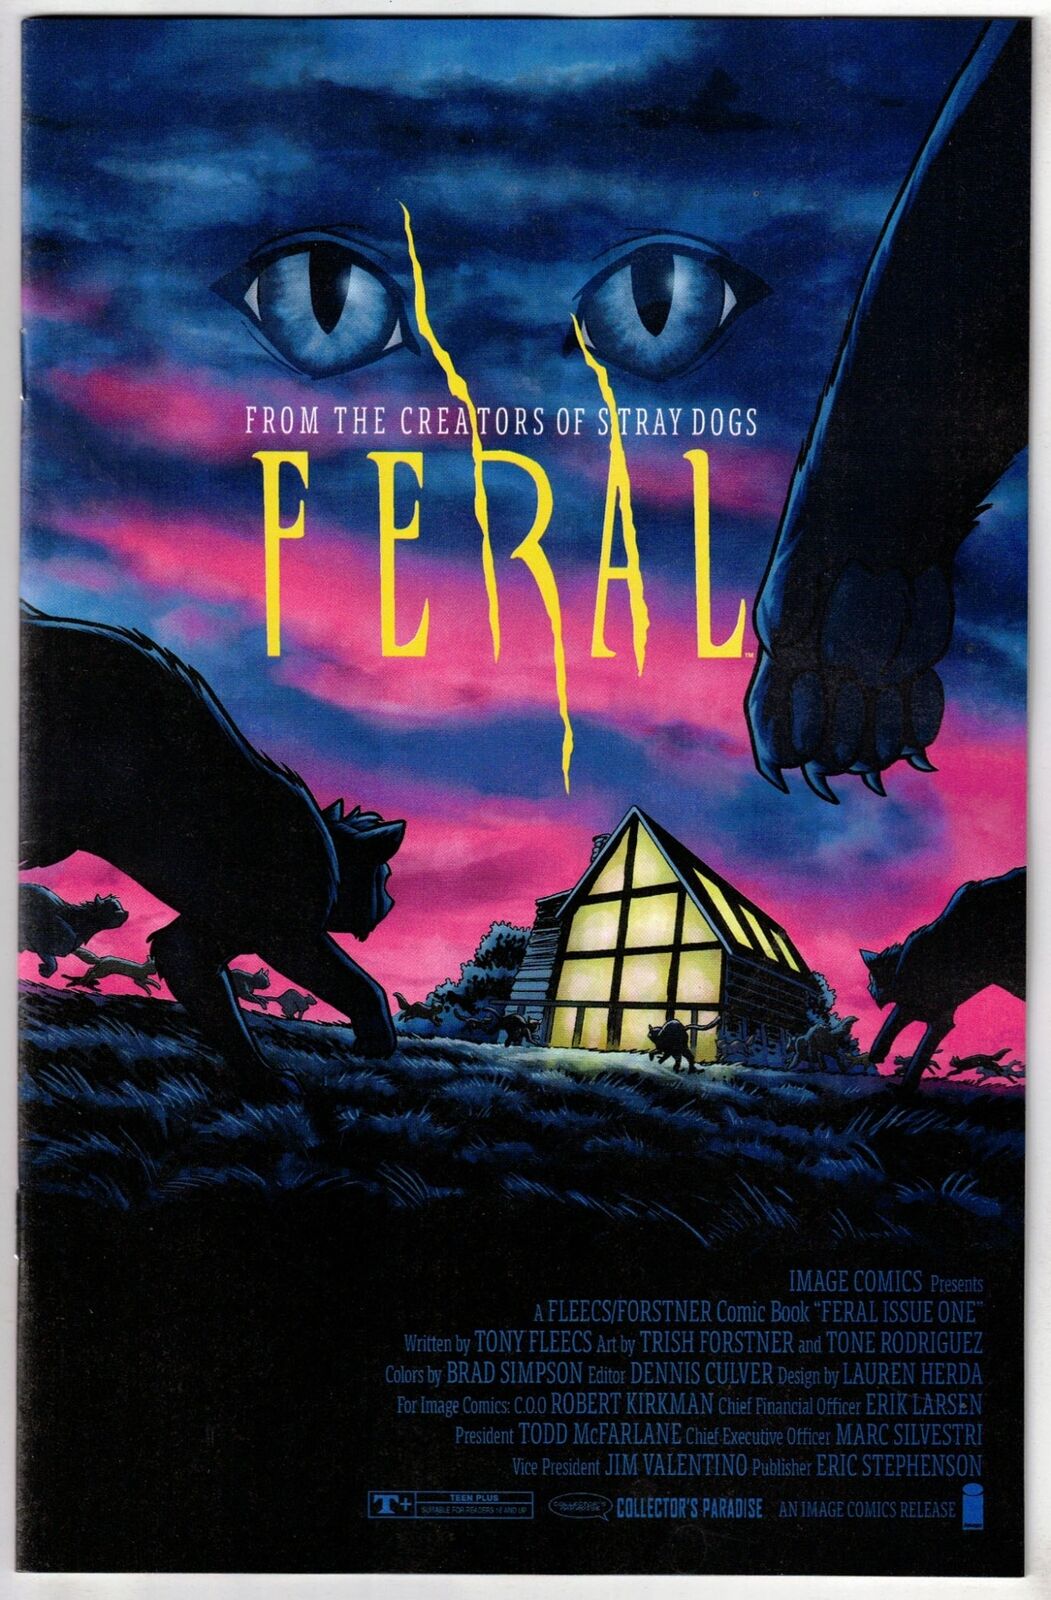 FERAL #1- FLEECS & FORSTNER COLLECTOR'S PARADISE EXCLUSIVE HOMAGE VARIANT- IMAGE